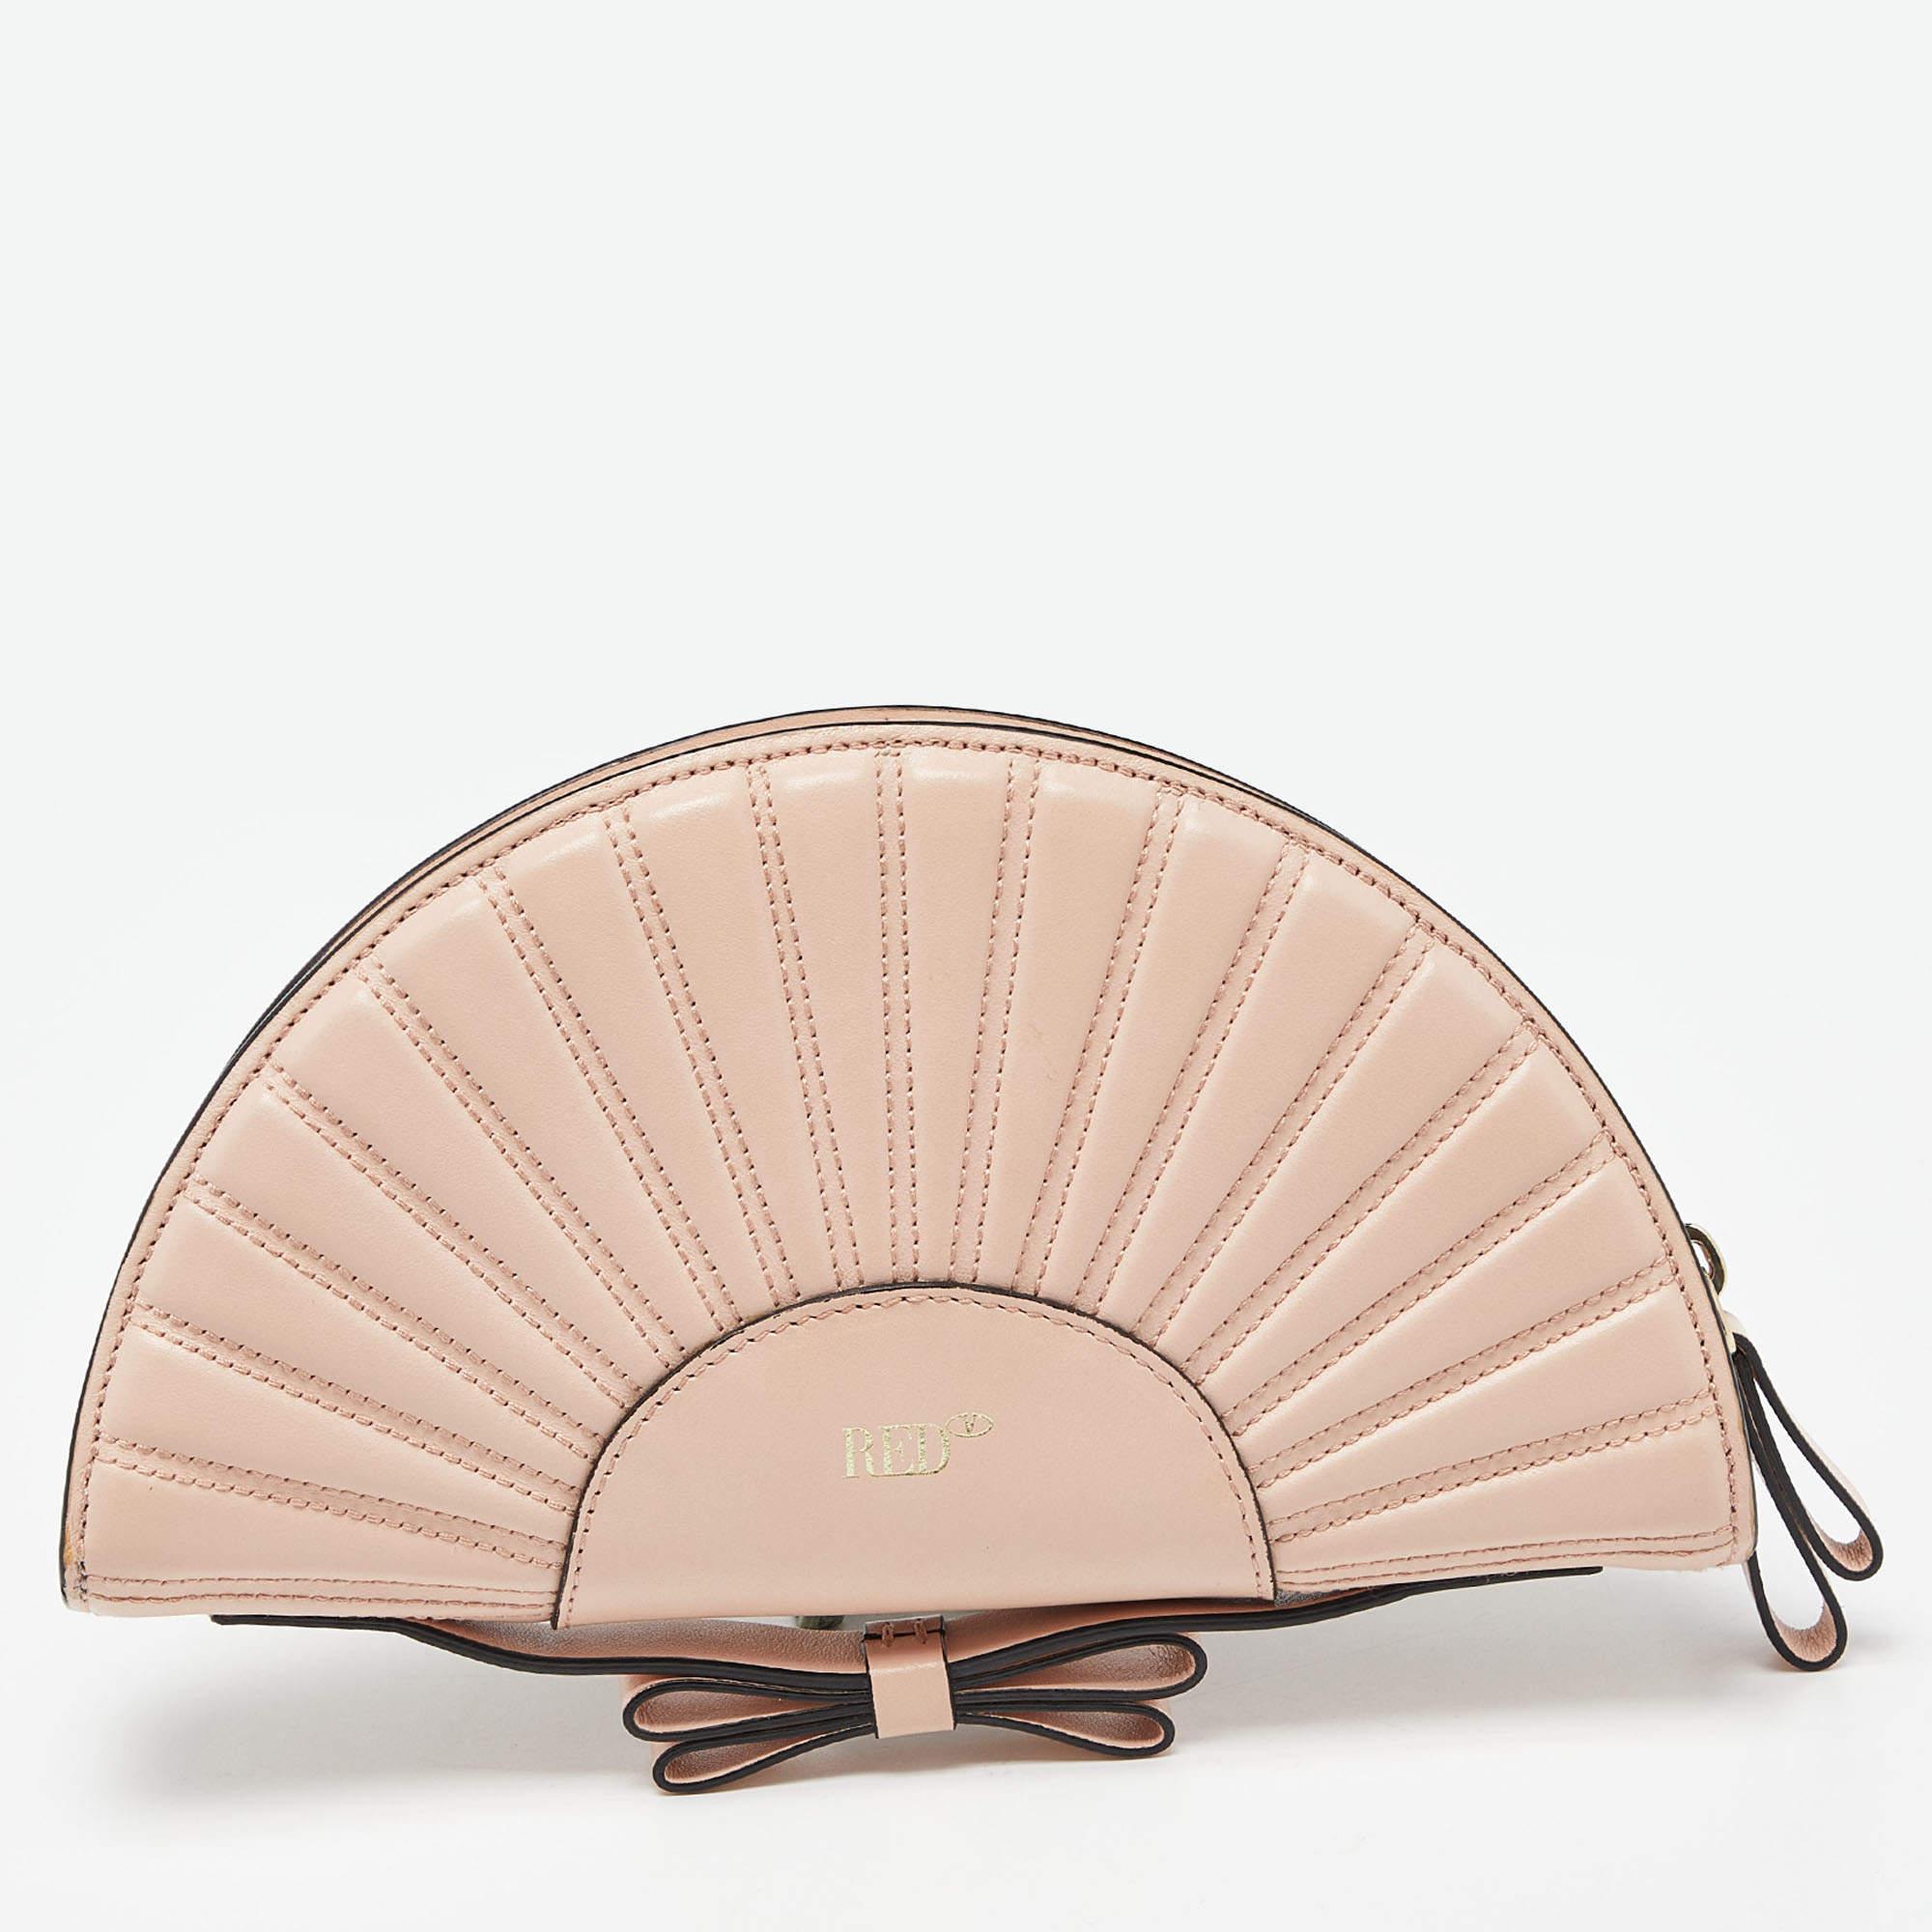 The RED Valentino clutch is an exquisite accessory, crafted from supple peach-hued leather. Its elegant shell shape is adorned with a prominent bow, adding a touch of femininity. The compact design makes it a versatile and stylish companion for any